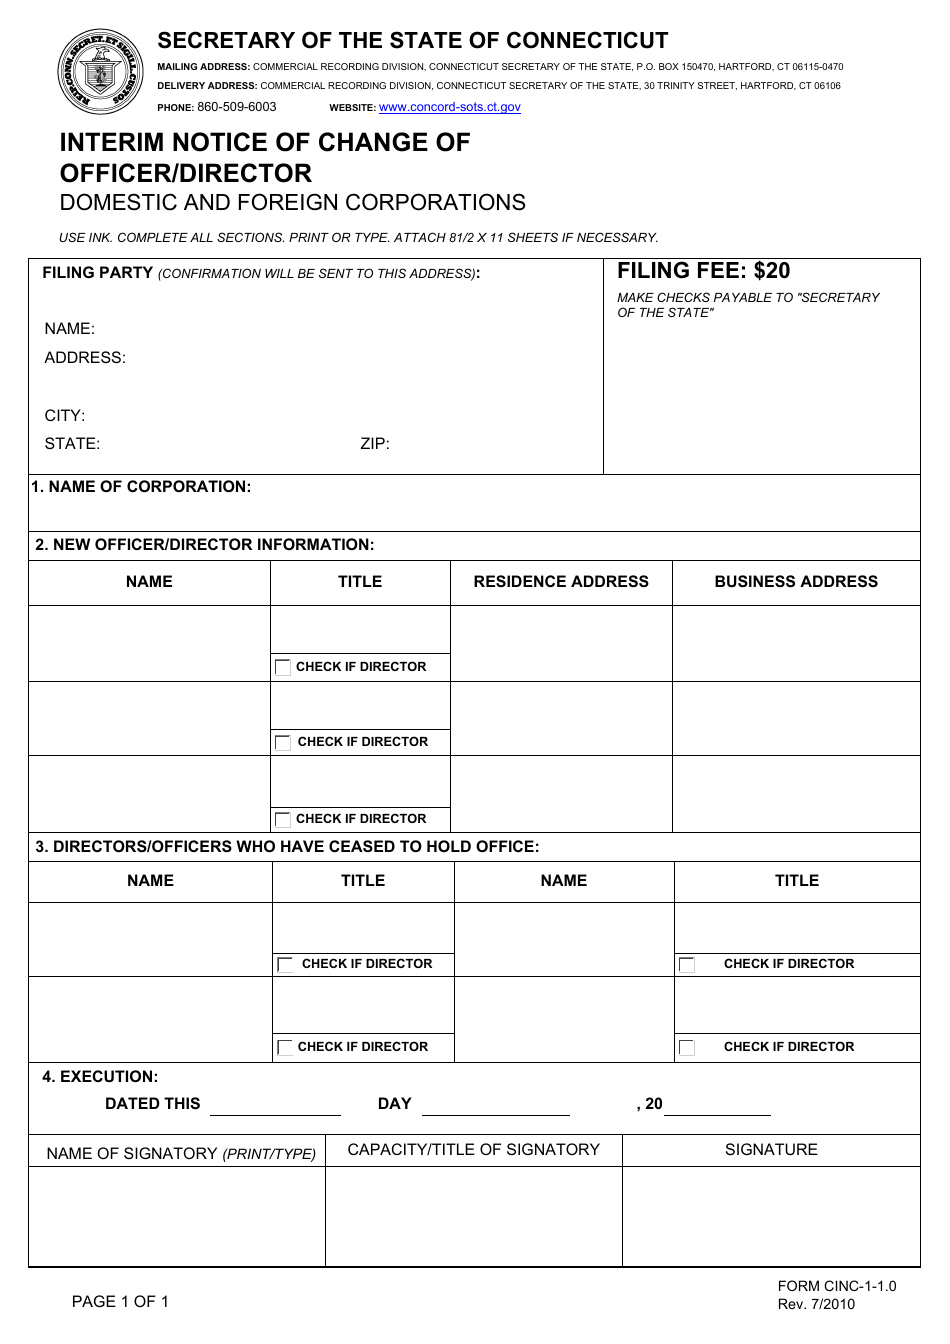 Form CINC-1-1.0 Interim Notice of Change of Officer / Director - Connecticut, Page 1